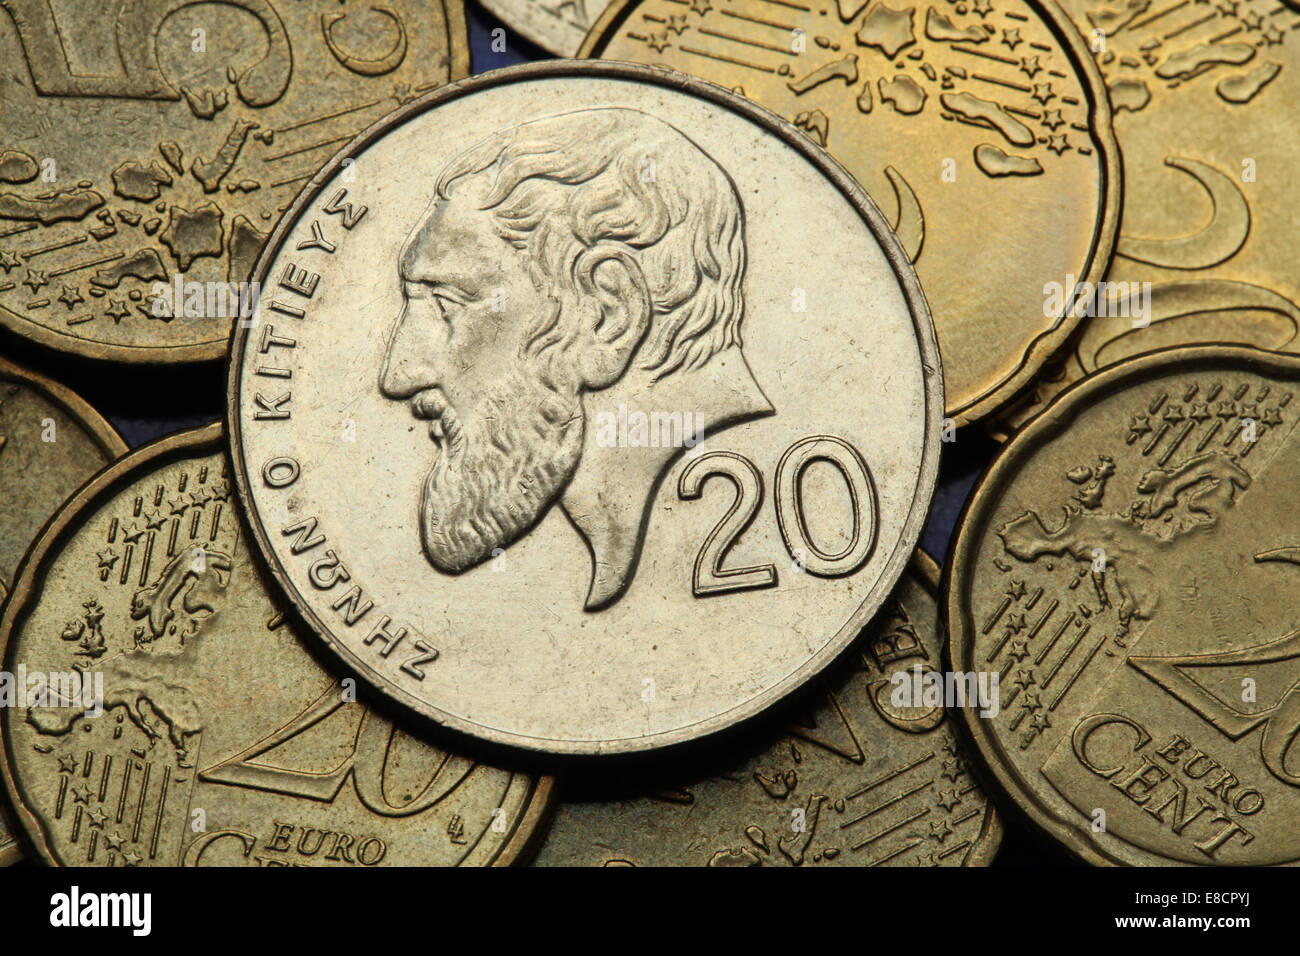 Coins of Cyprus. Greek philosopher Zeno of Citium depicted in the old Cypriot 20 cents coin. Stock Photo